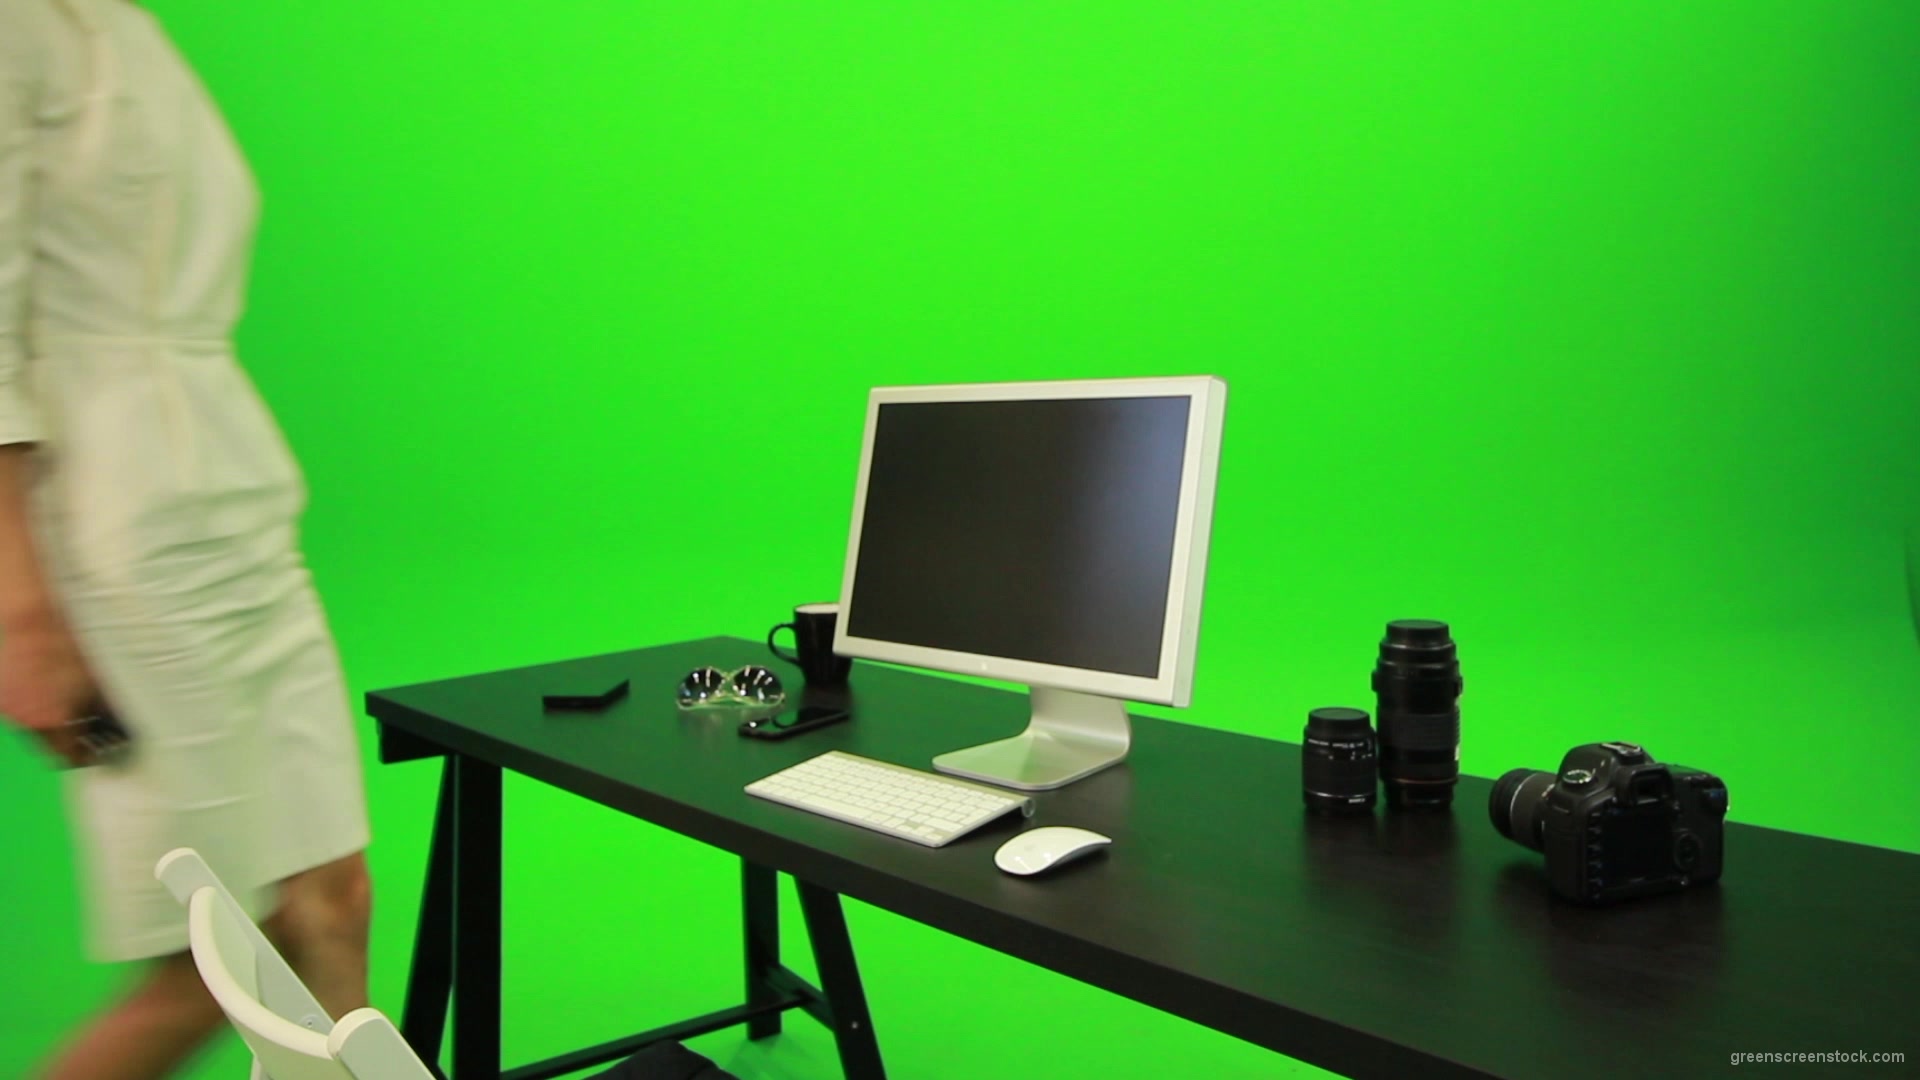 Woman-Sits-Down-and-Works-on-the-Computer-Green-Screen-Footage_002 Green Screen Stock